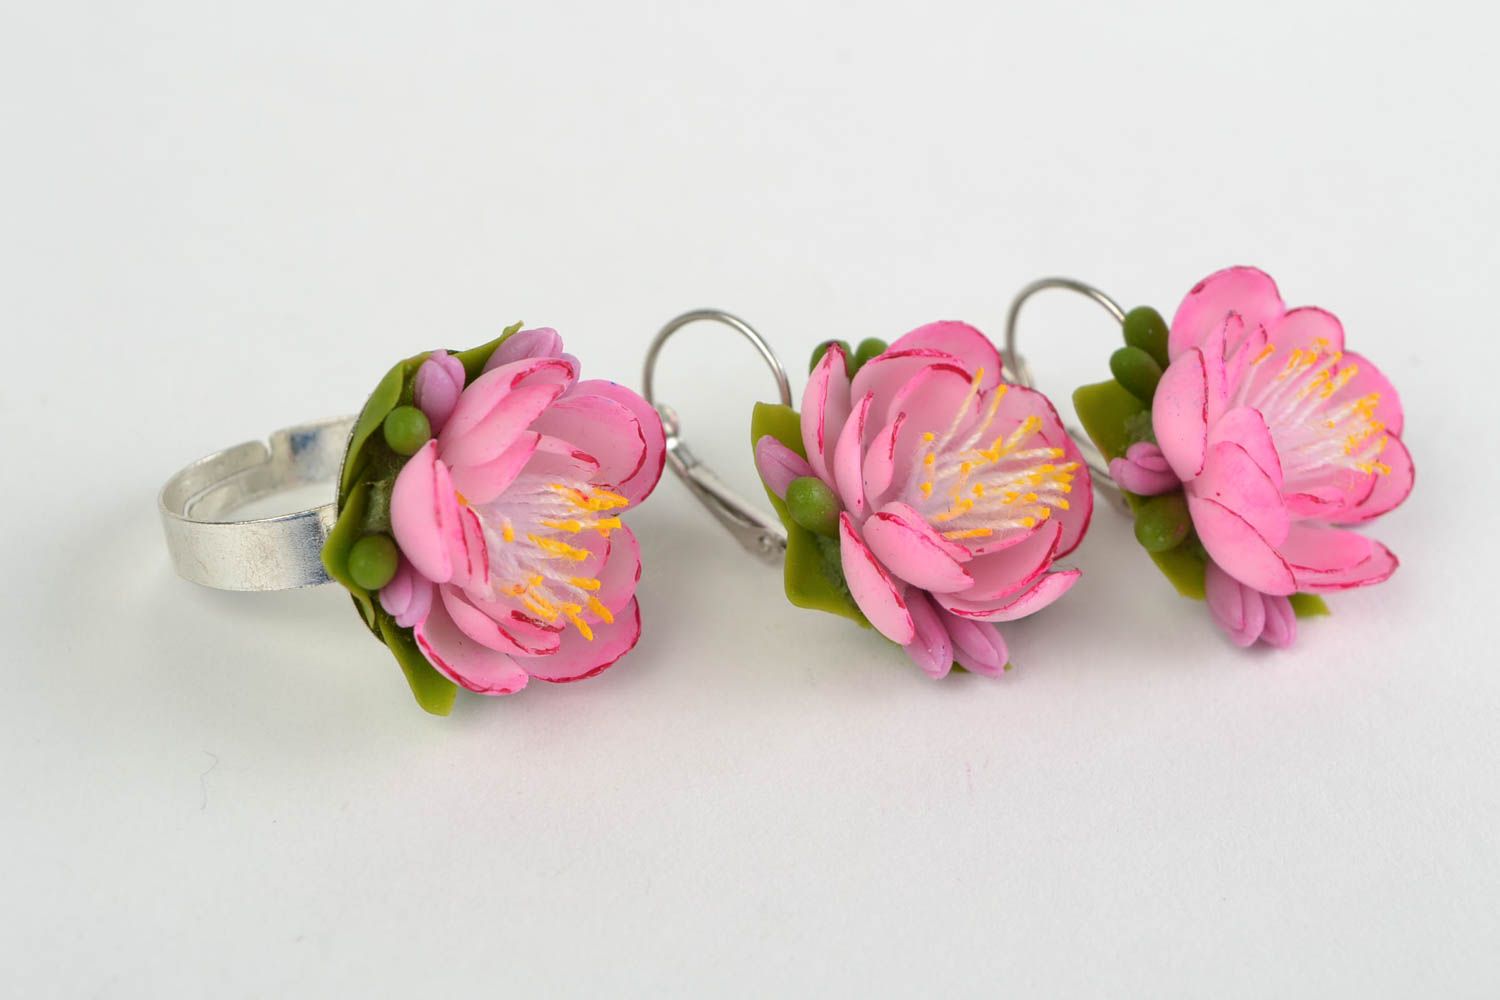 Pink cold porcelain flower jewelry set 2 pieces earrings and ring handmade photo 2